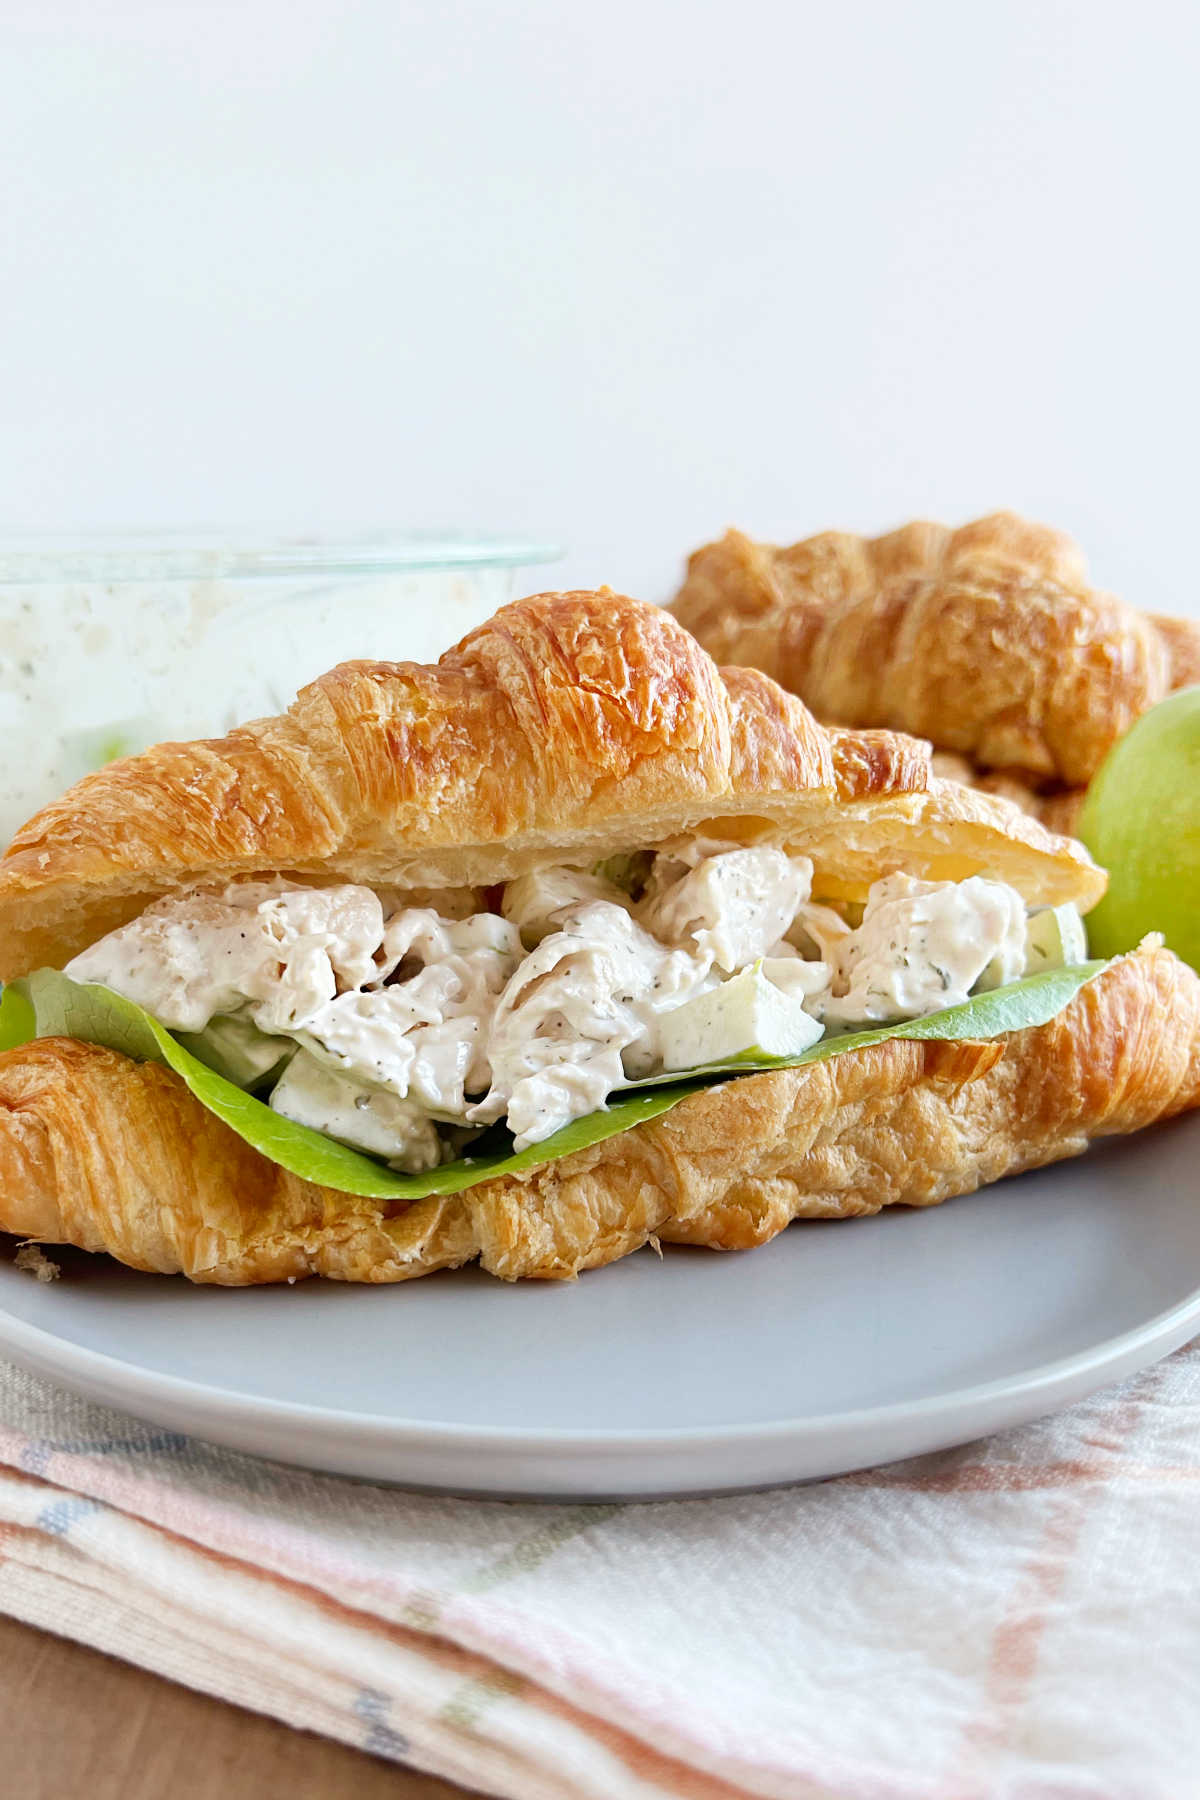 lemon chicken salad with apples in a croissant roll on plate